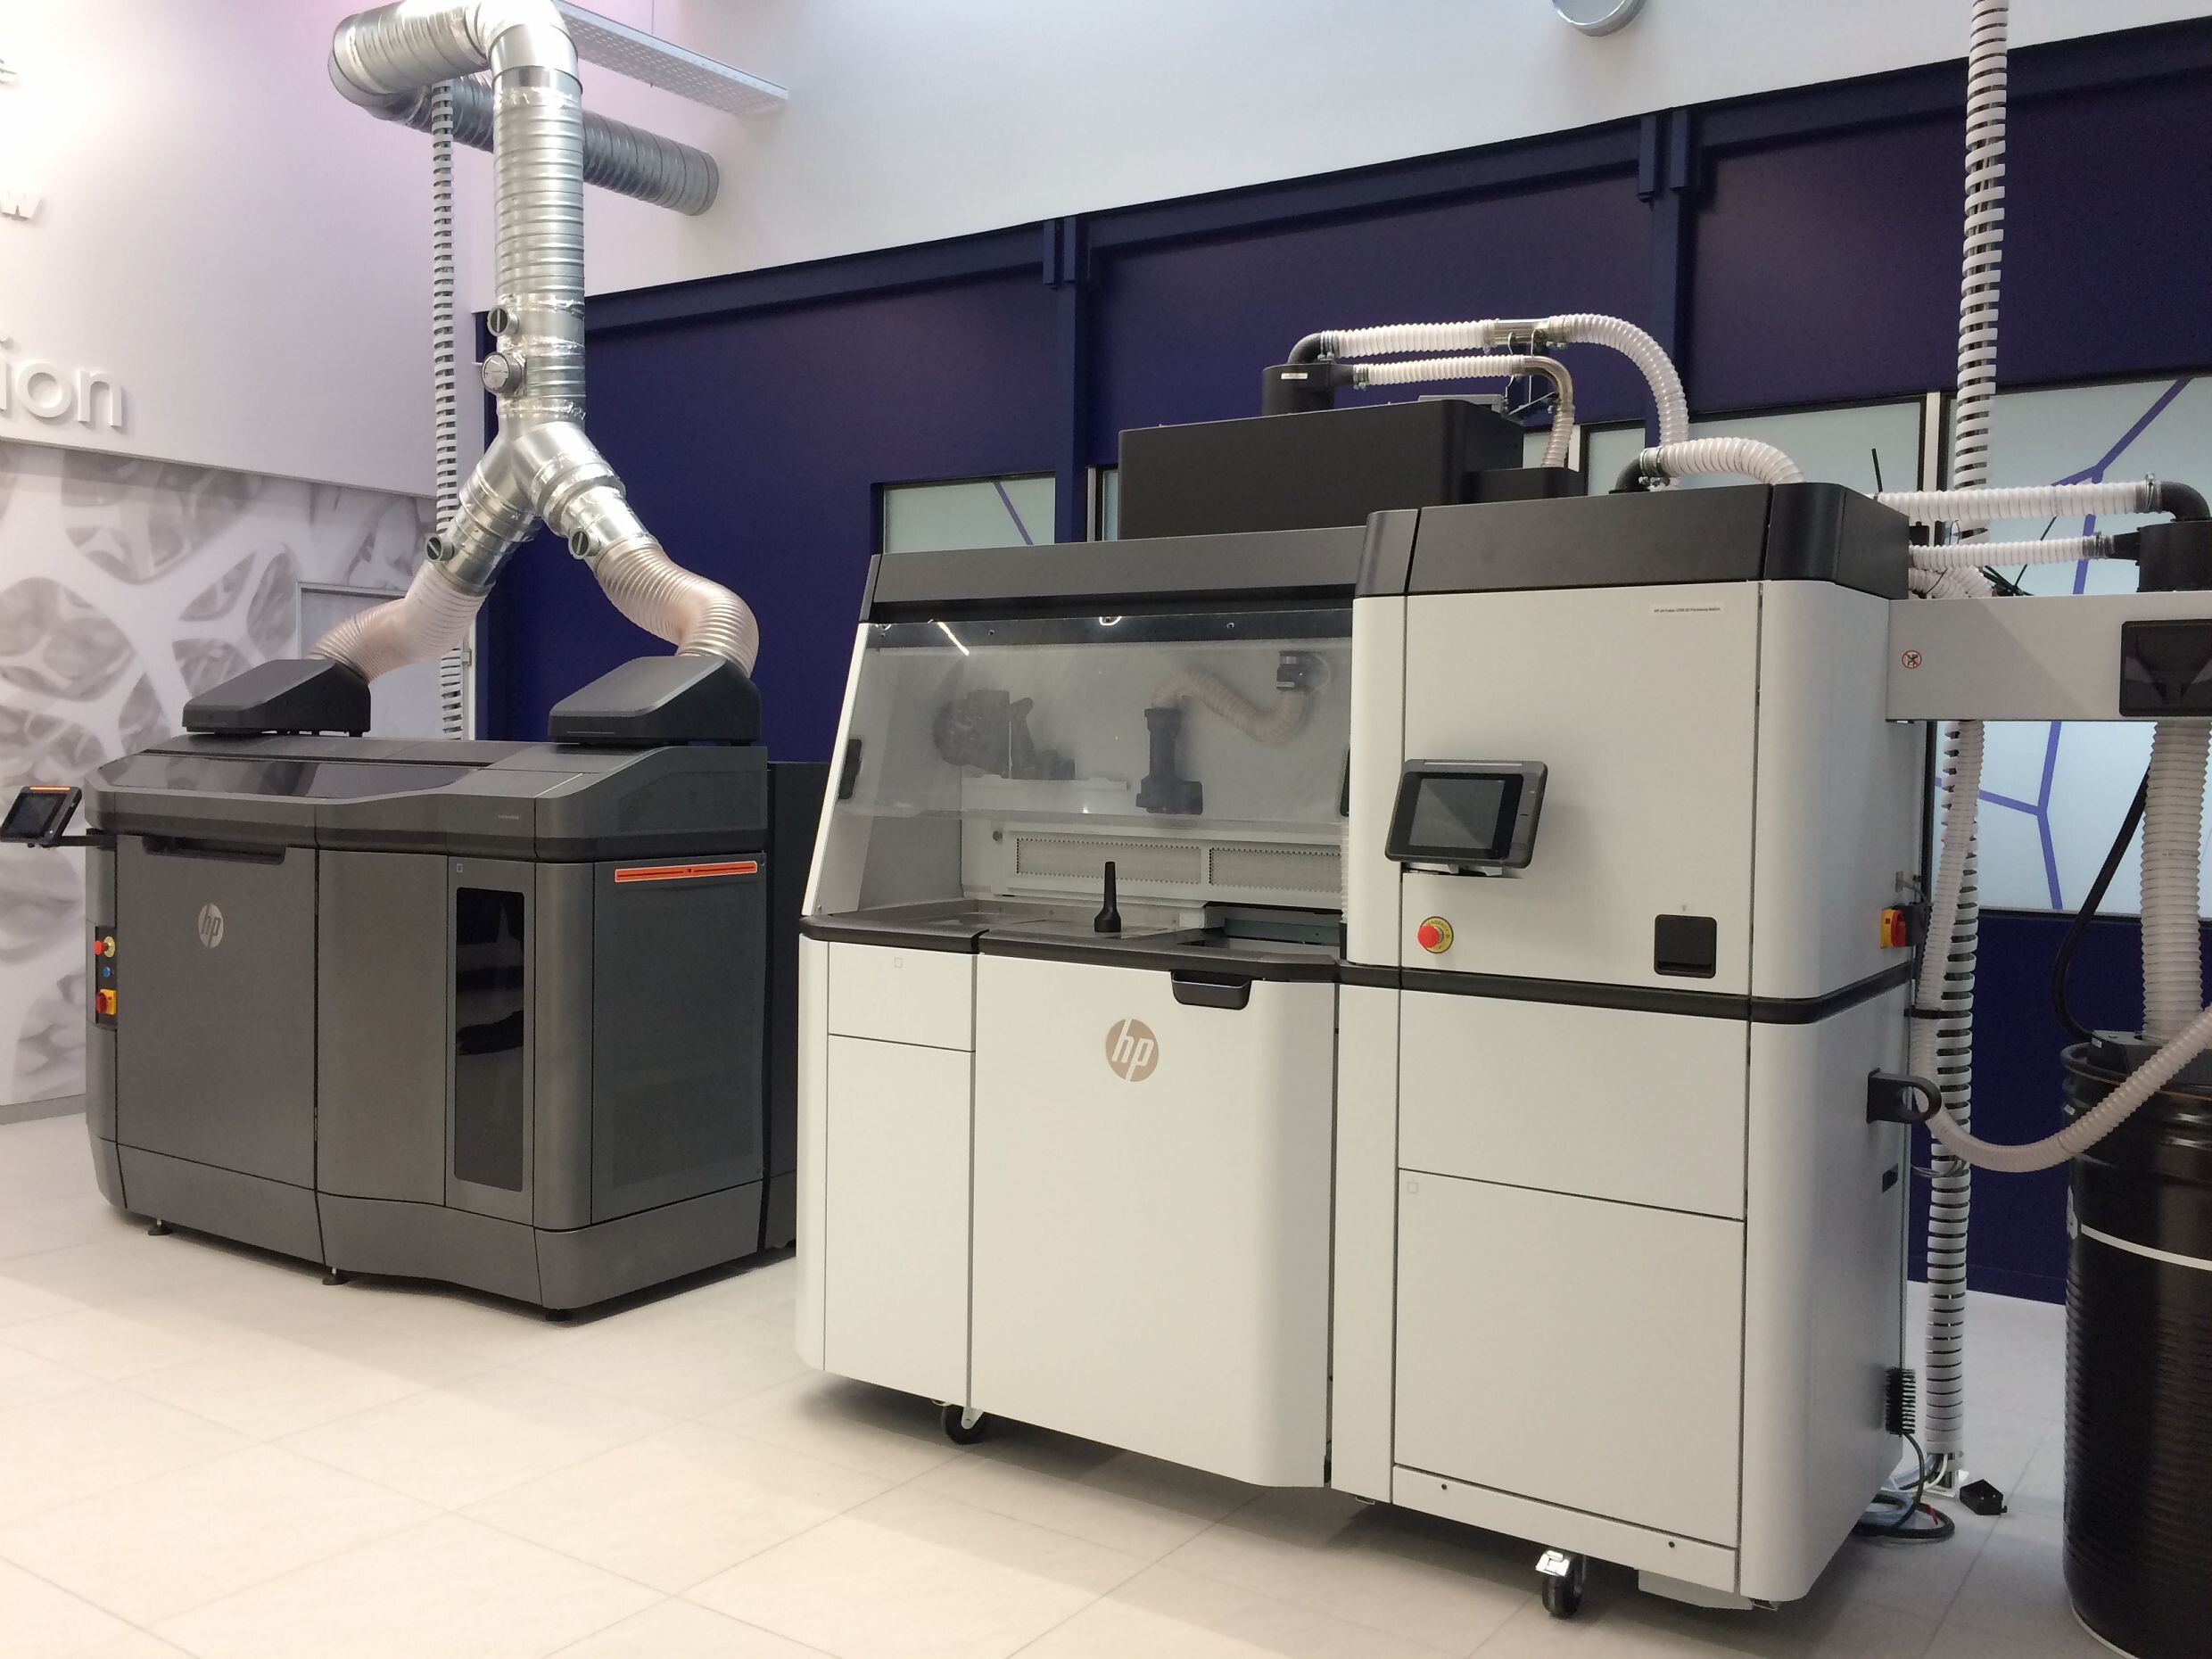 HP 3D printers (powder bed fusion technology) at the Cerdato